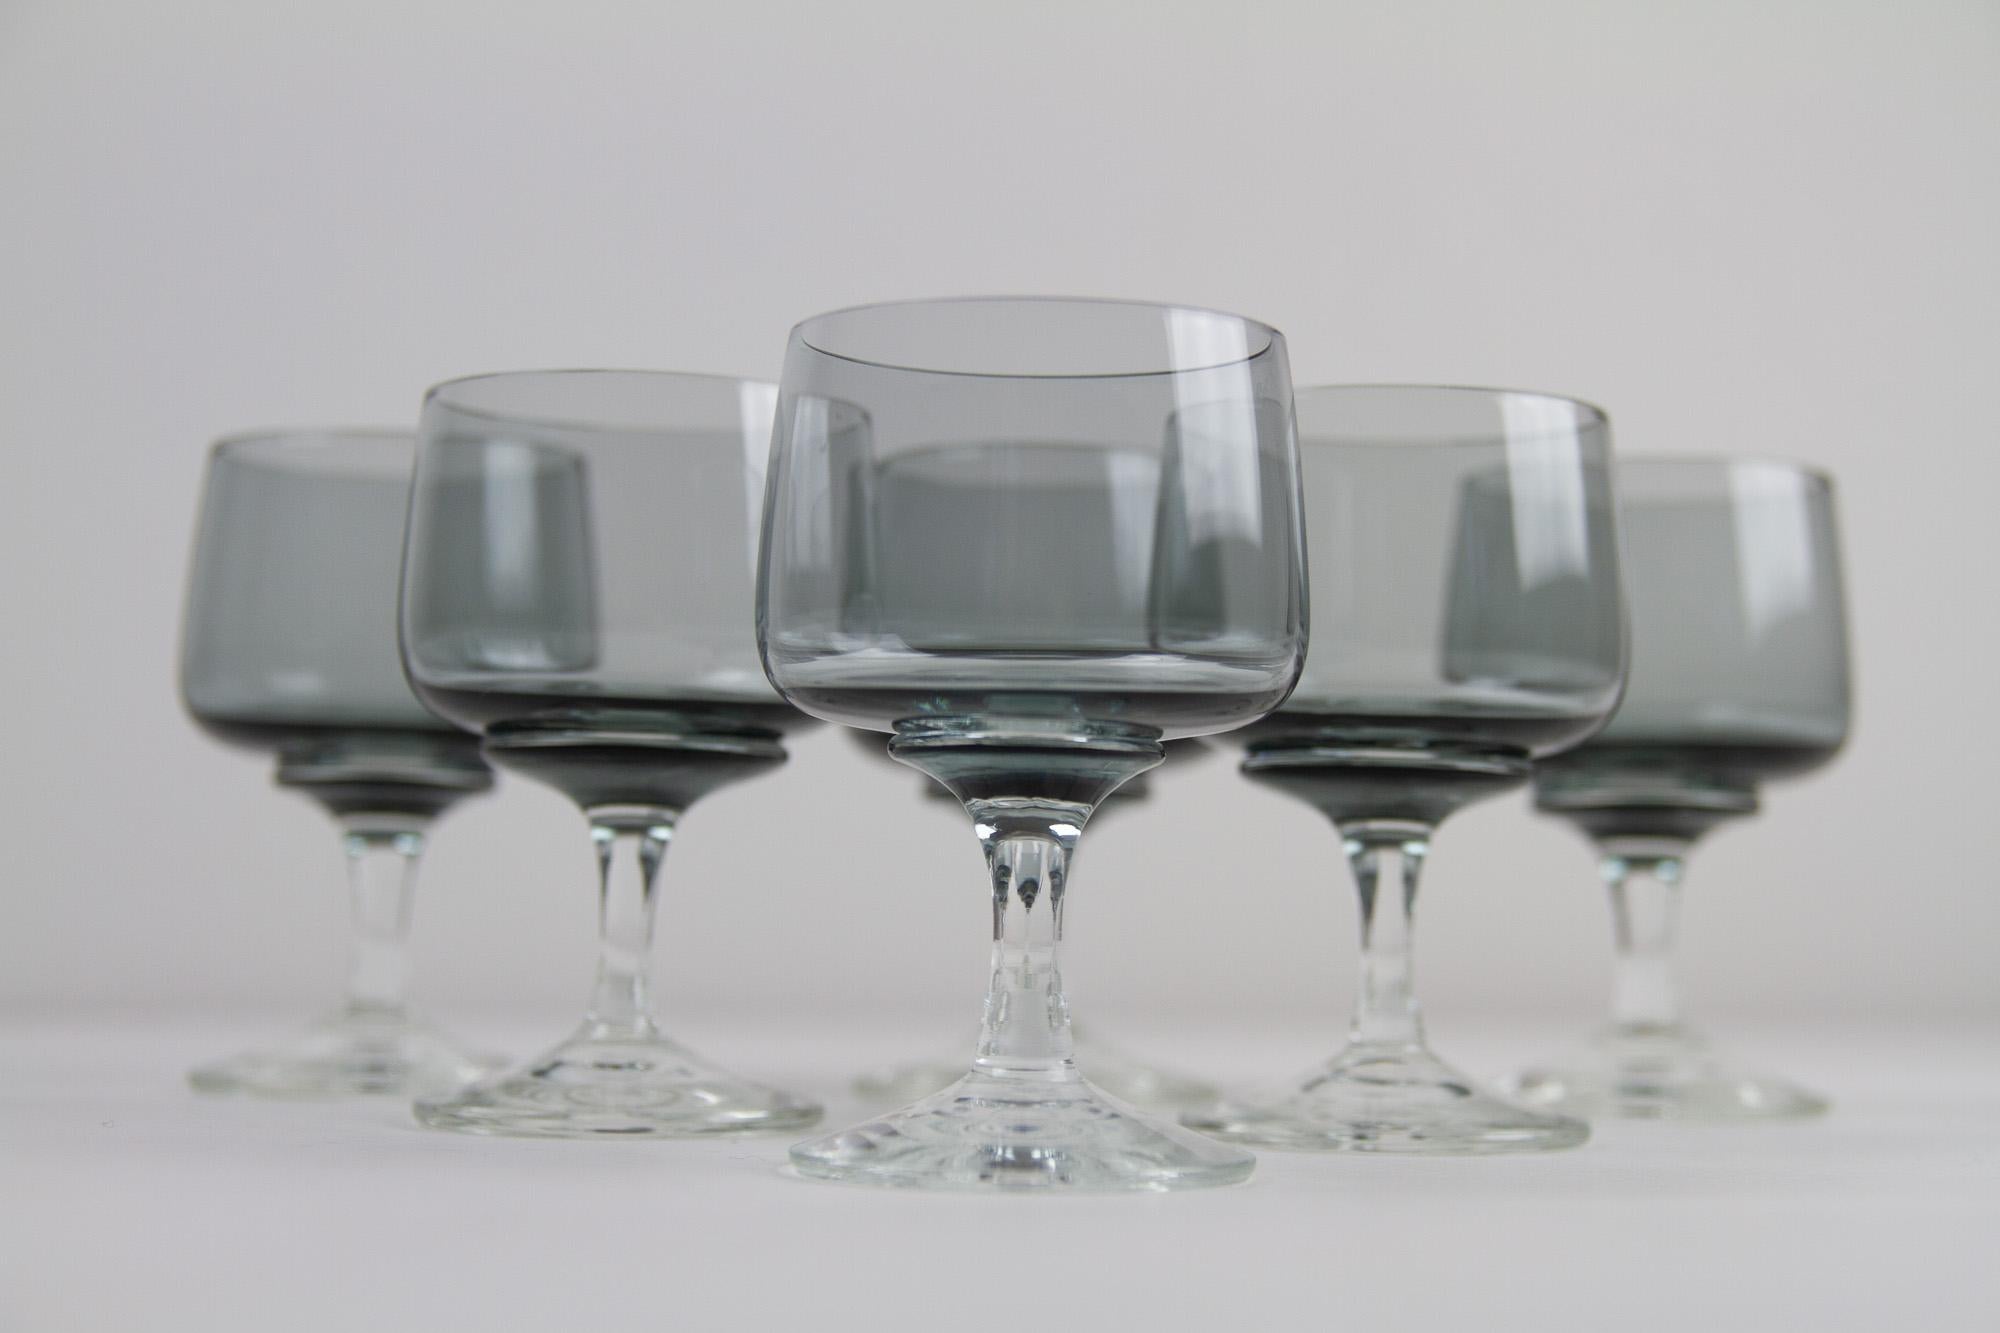 Vintage Danish Holmegaard Atlantic Port/Liquor Glasses, 1960s. Set of 6.
Set of 6 beautiful hand-blown vintage drinking glasses from Danish glasswork Holmegaard designed by Per Lütken in 1962. These were only manufactured between 1962 and 1975. 
The